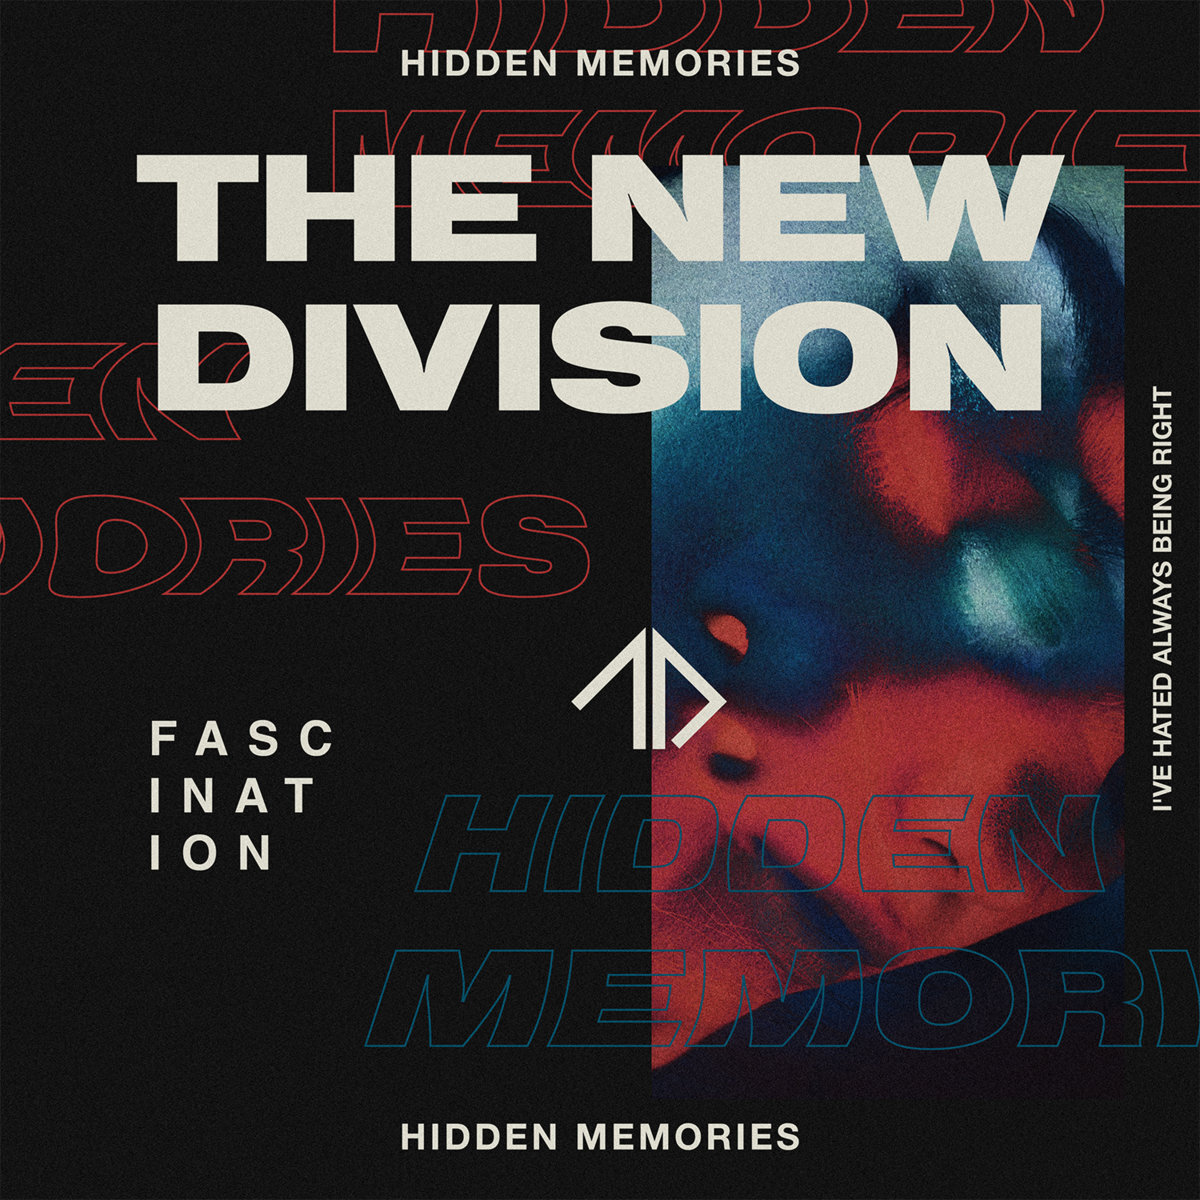 The New Division - Fascination.jpg